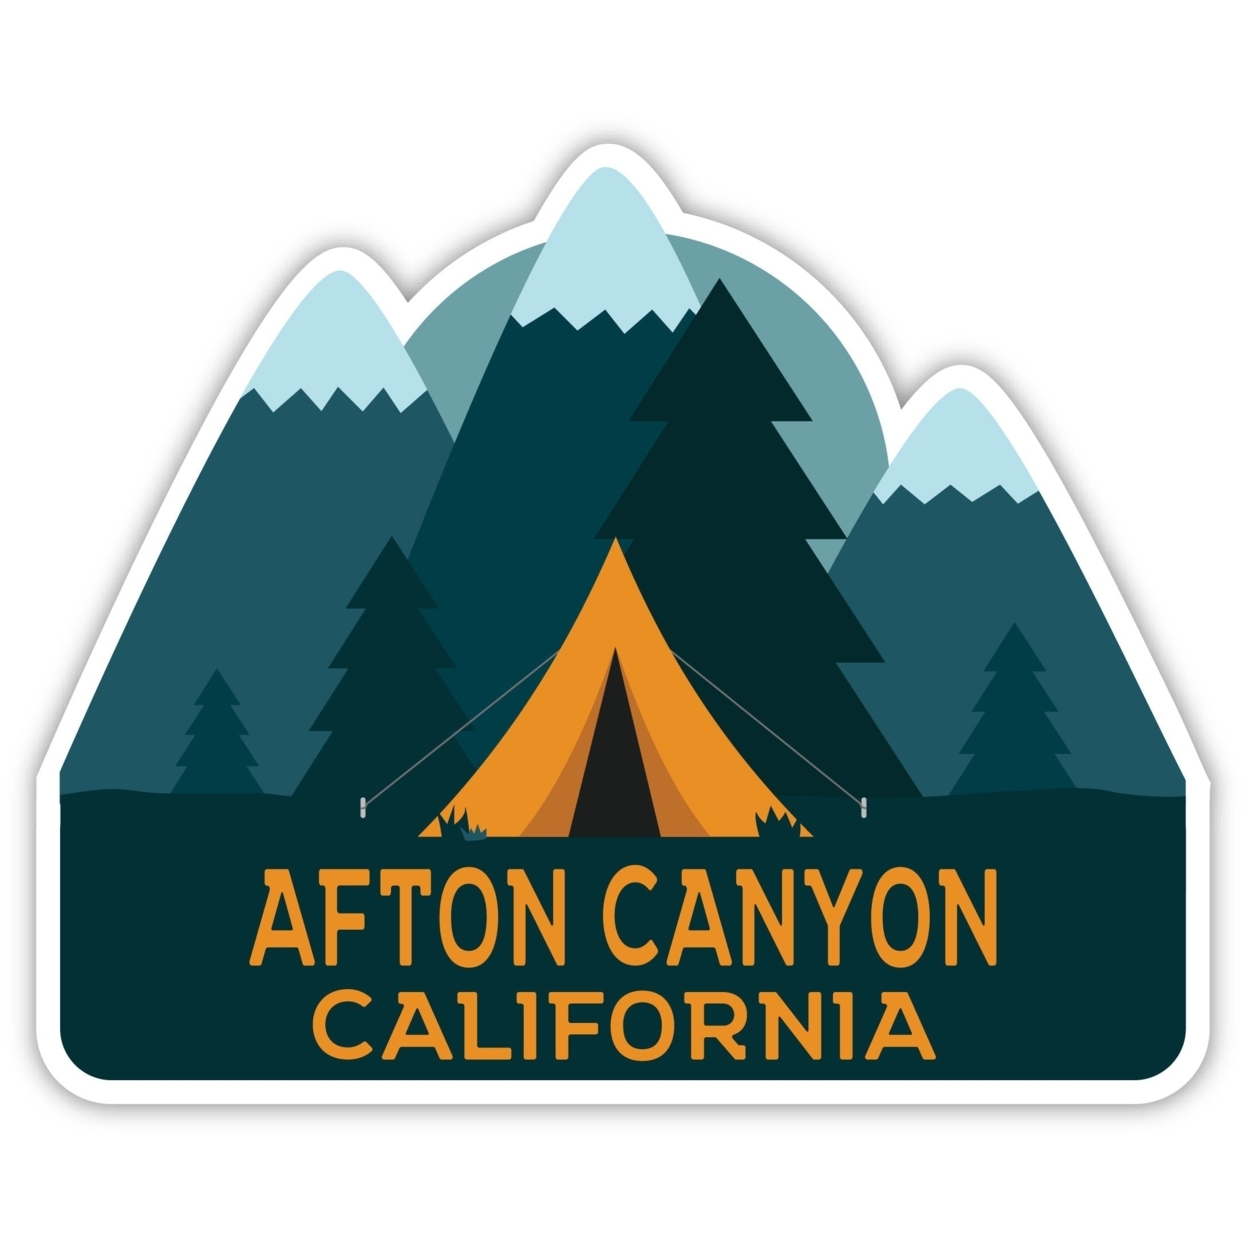 Afton Canyon California Souvenir Decorative Stickers (Choose Theme And Size) - 4-Pack, 2-Inch, Tent